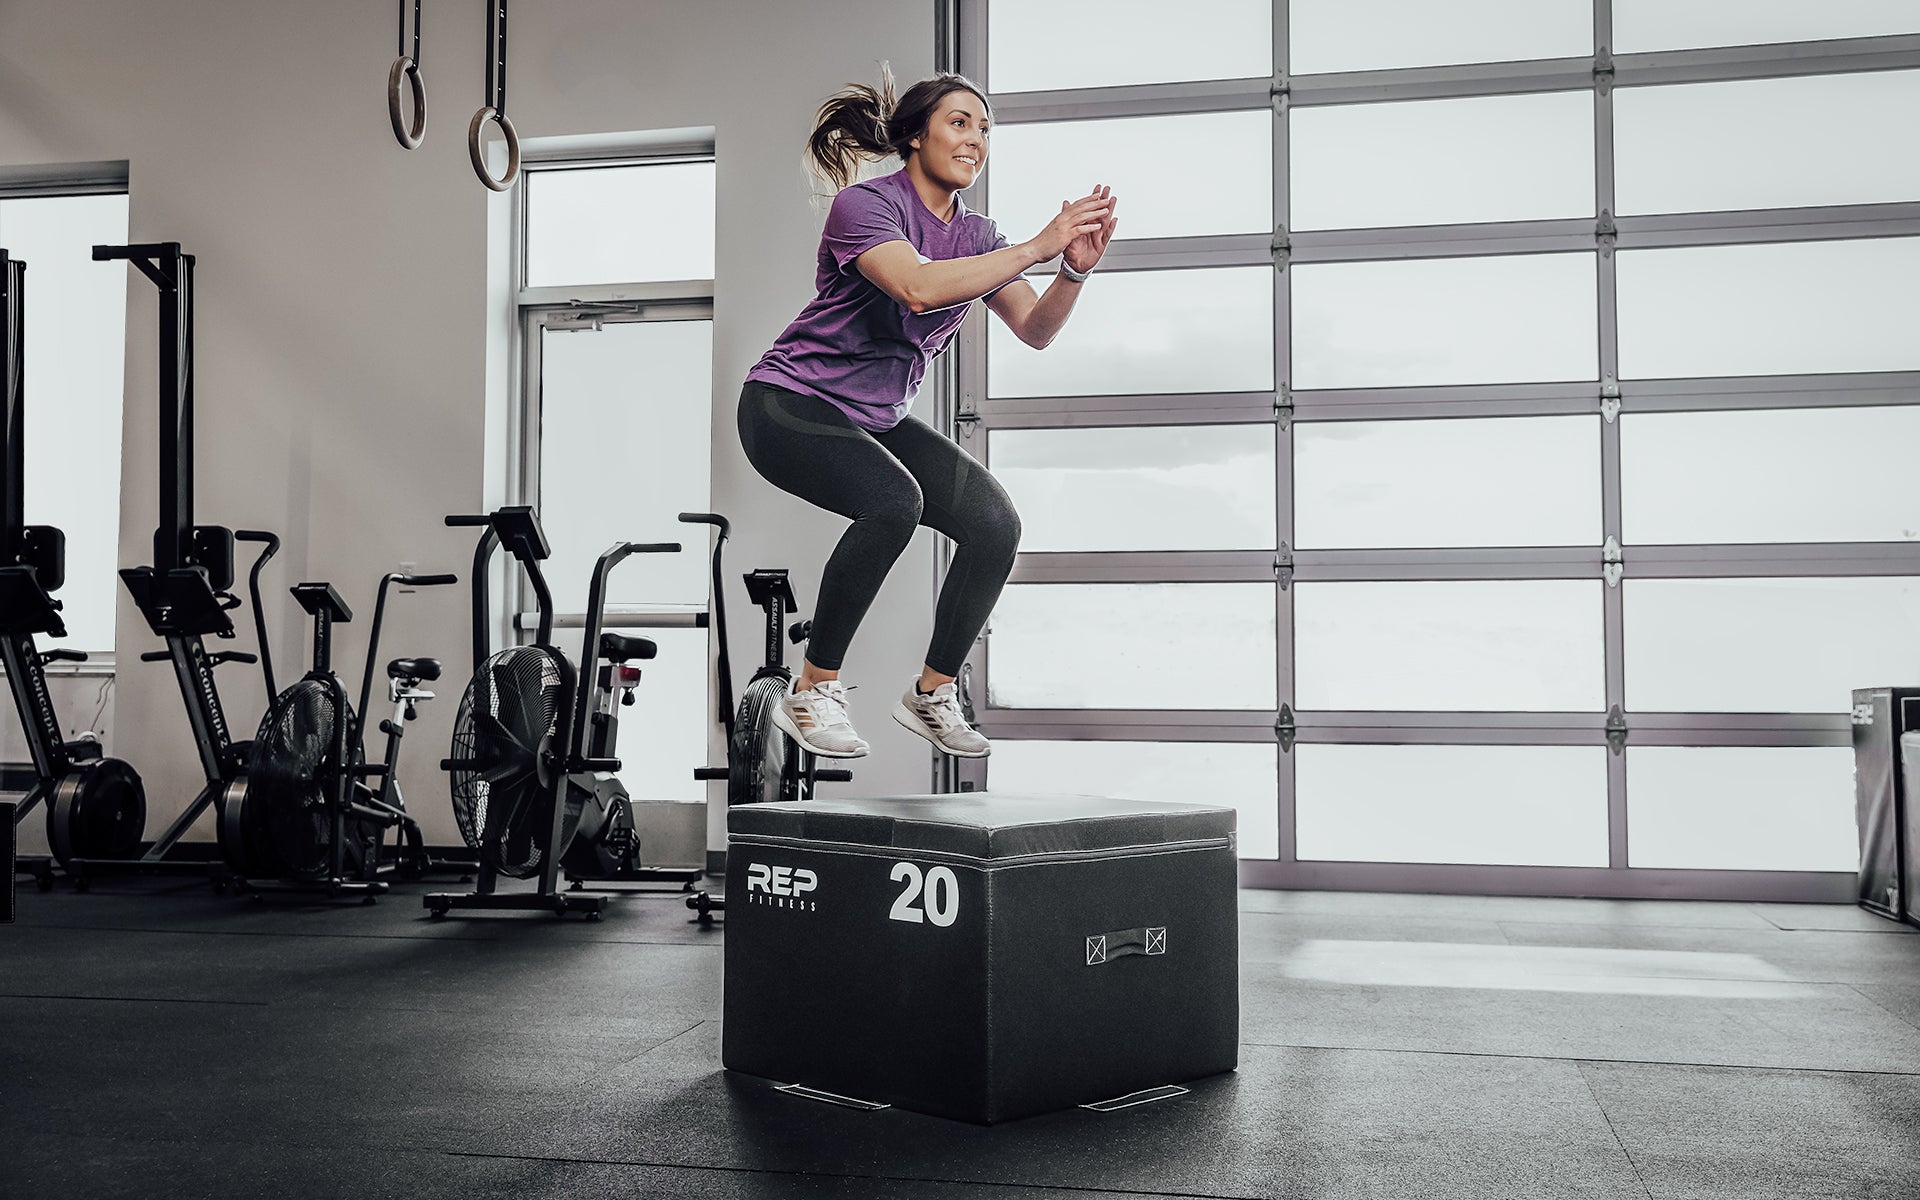 Female athlete performing box jumps on a 20